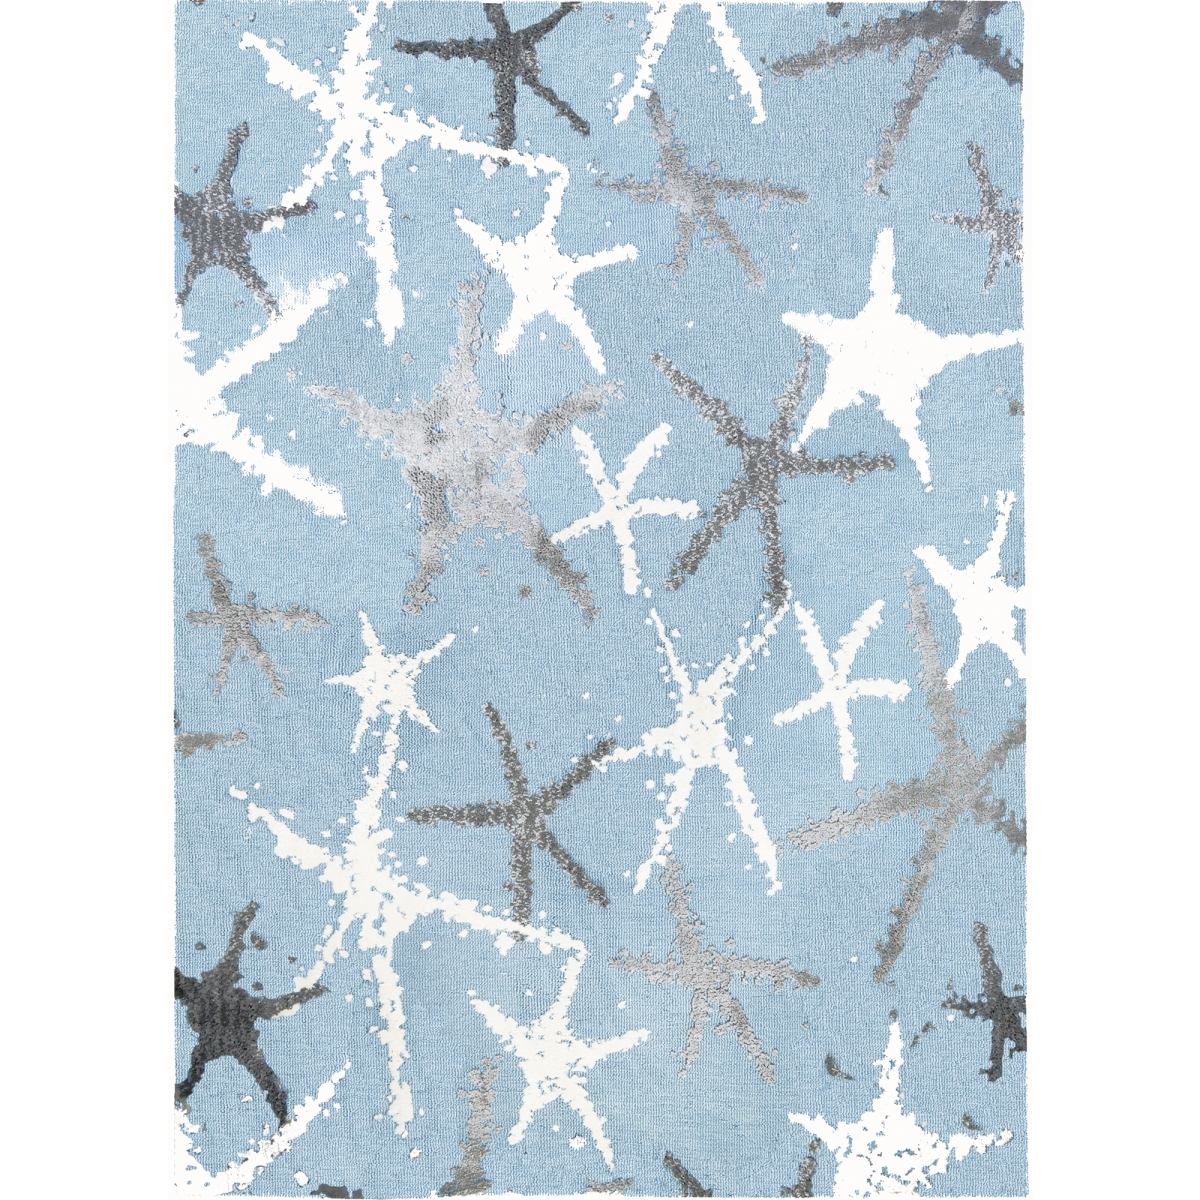 Pmf-kr001e 7 X 5 X 0.5 Ft. Tranquil Seas Indoor Area Rug, Multi Color